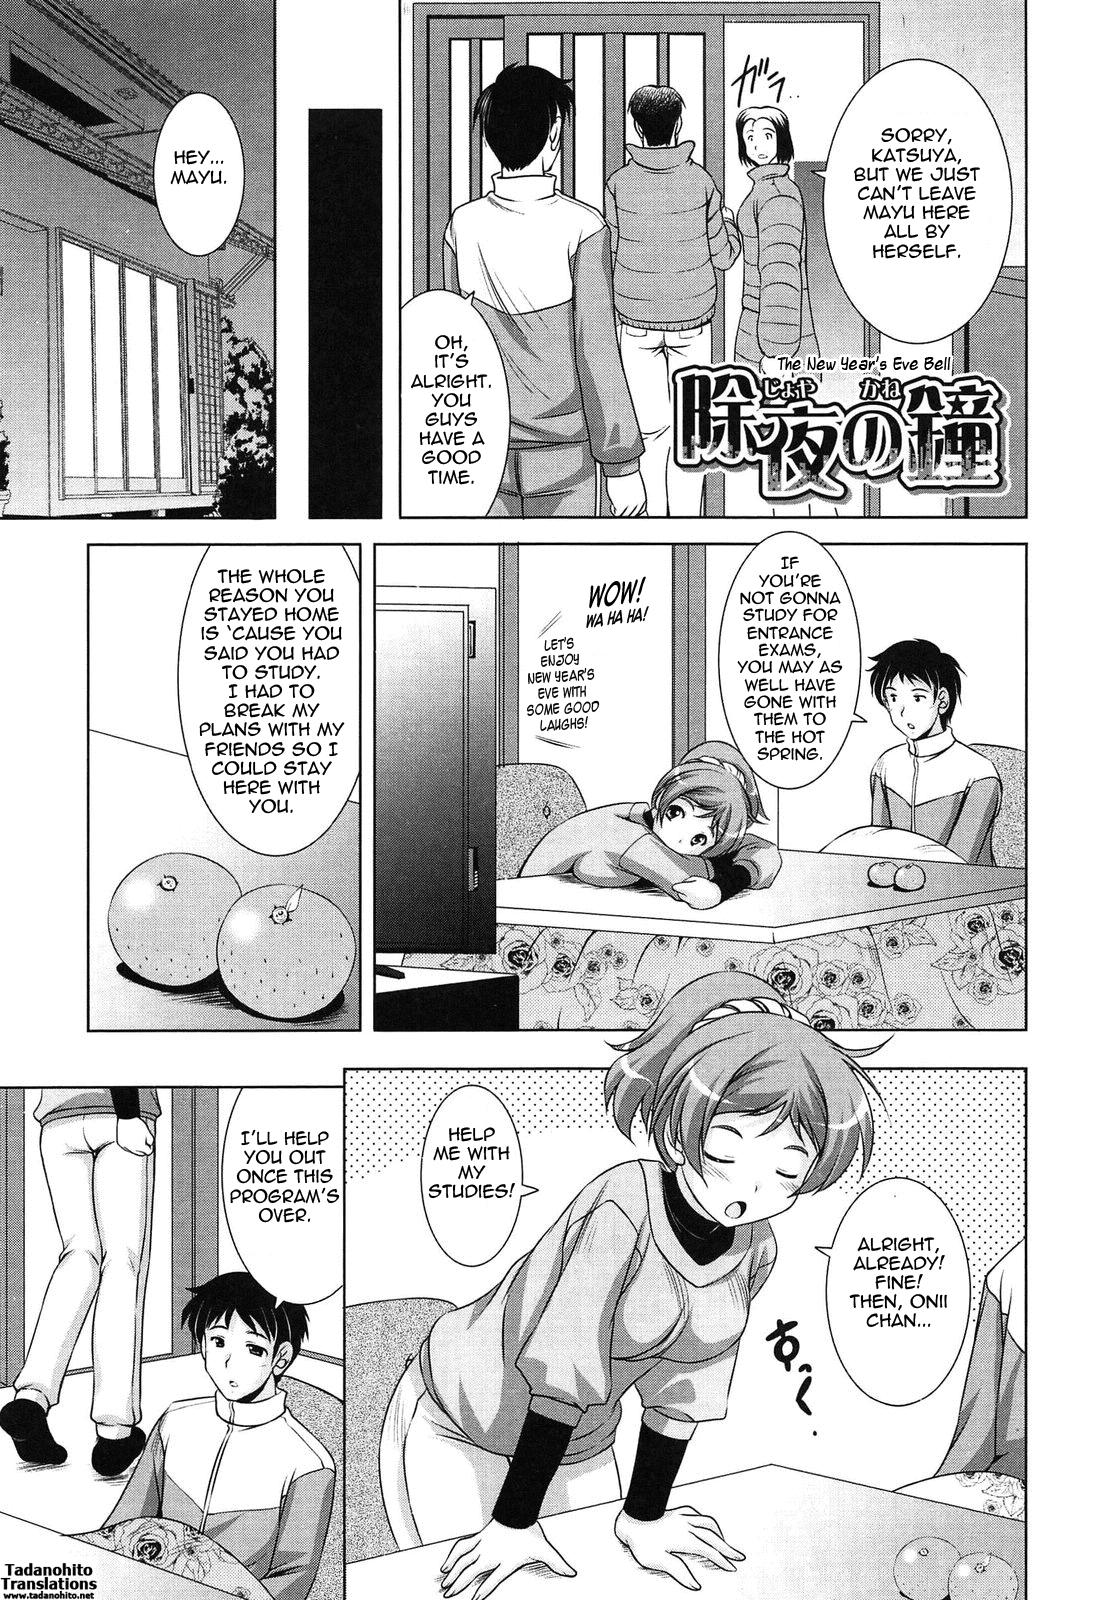 Staxxx Younger Girls! Celebration Ch. 1-7 Consolo - Page 9